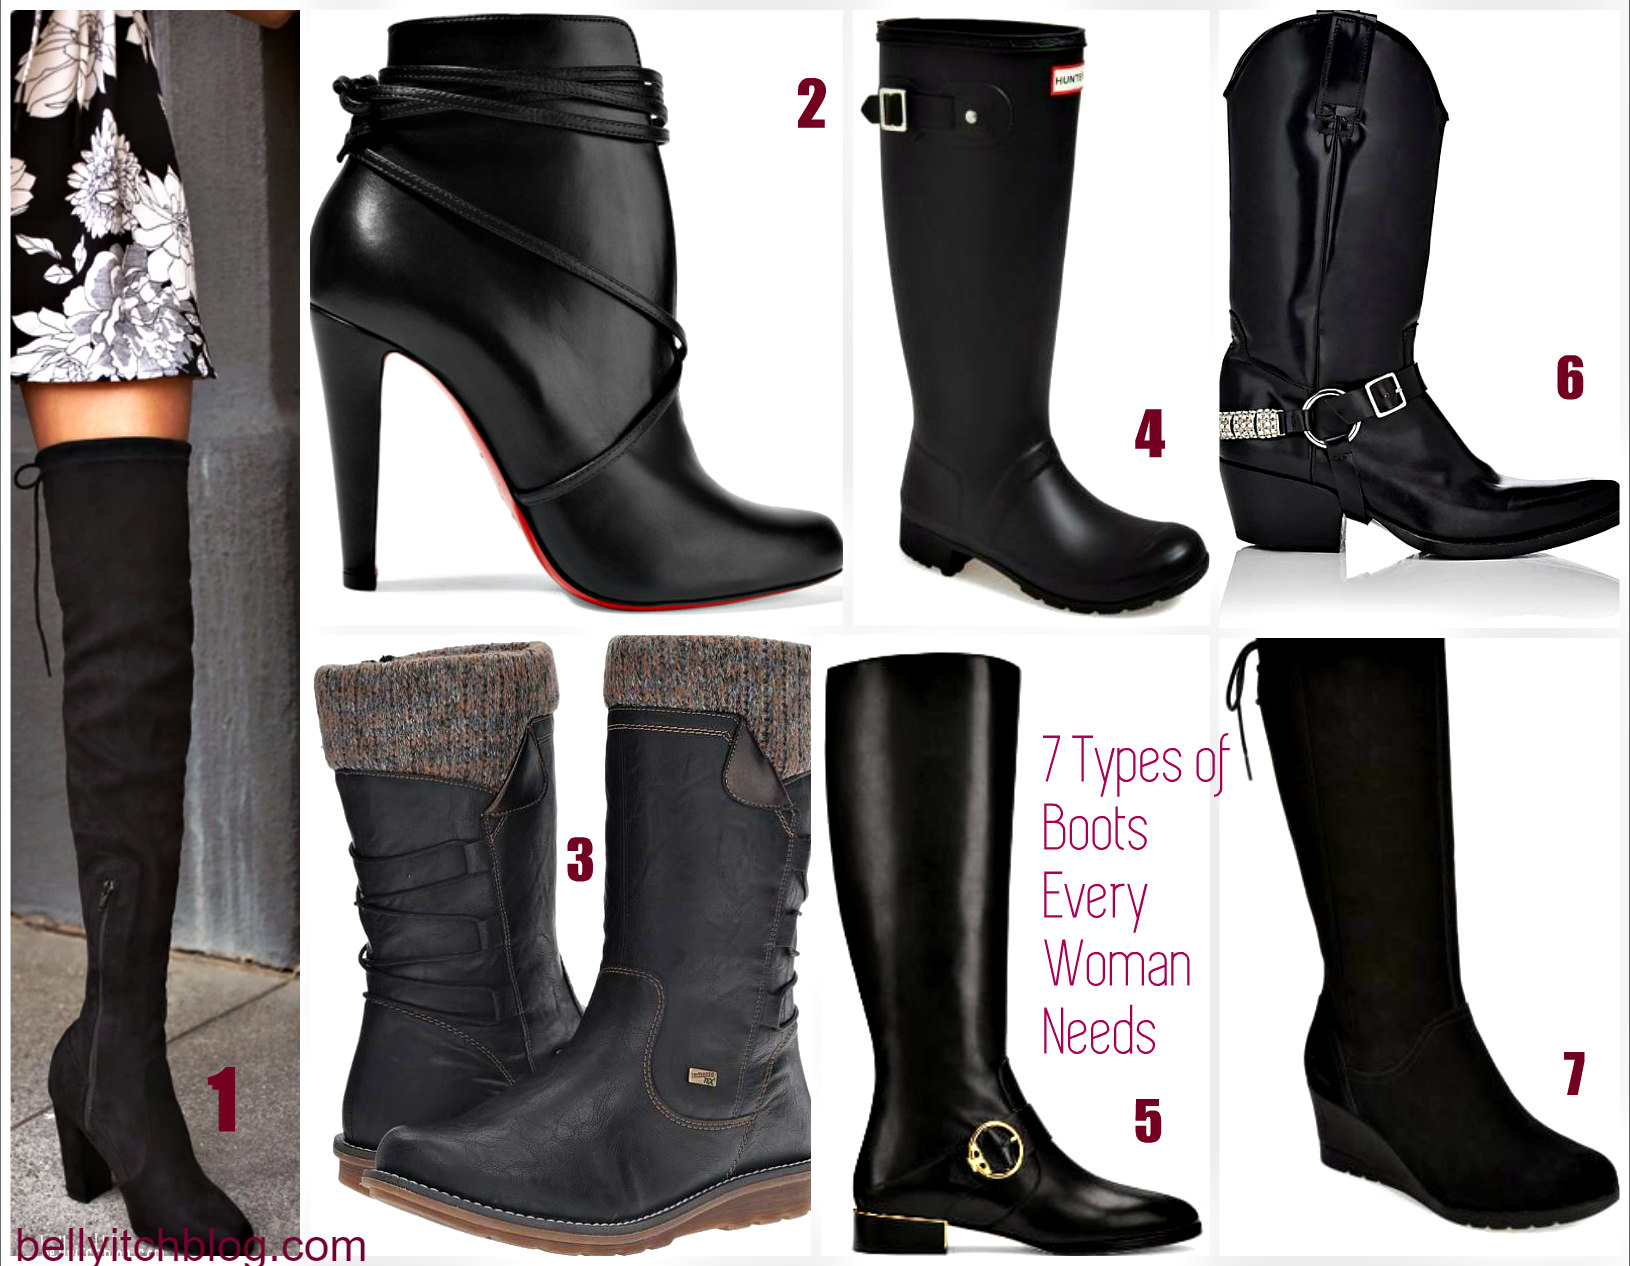 7 Type of Boots Every Woman Needs In Her Shoe Closet